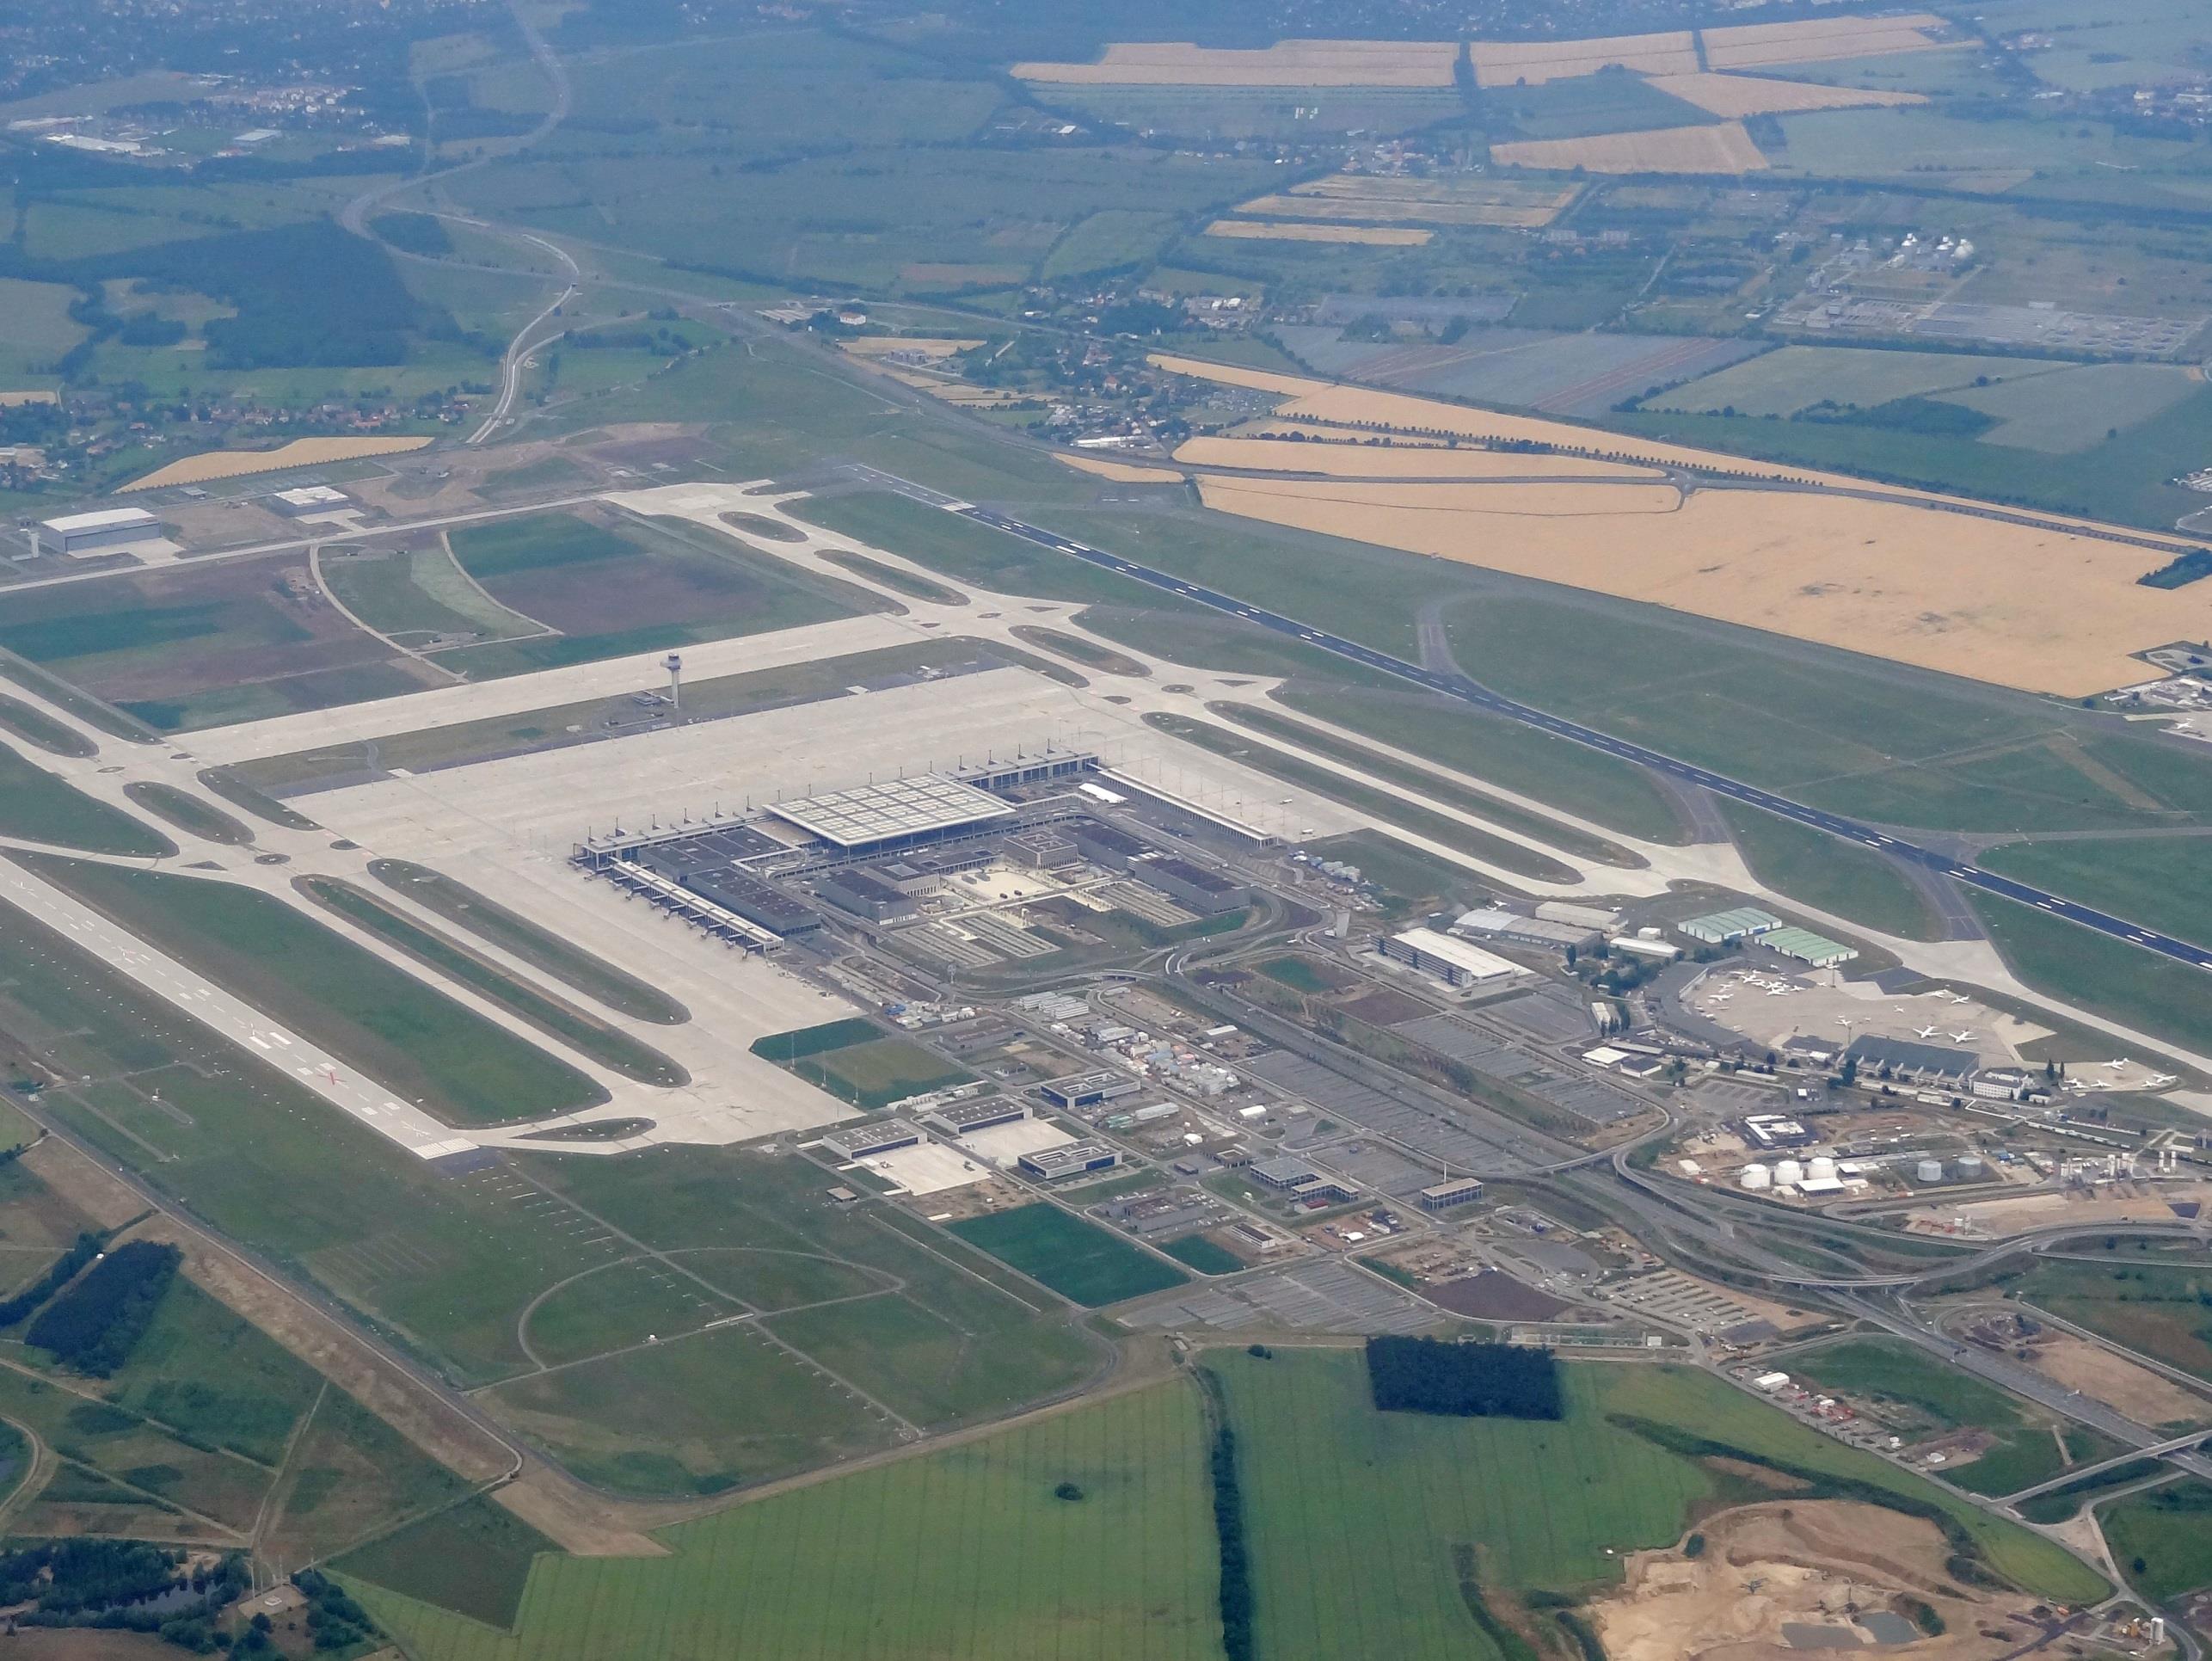 Originally planned to open in 2010, Berlin Brandenburg Airport has encountered a series of delays due to poor construction planning, management, execution and corruption.